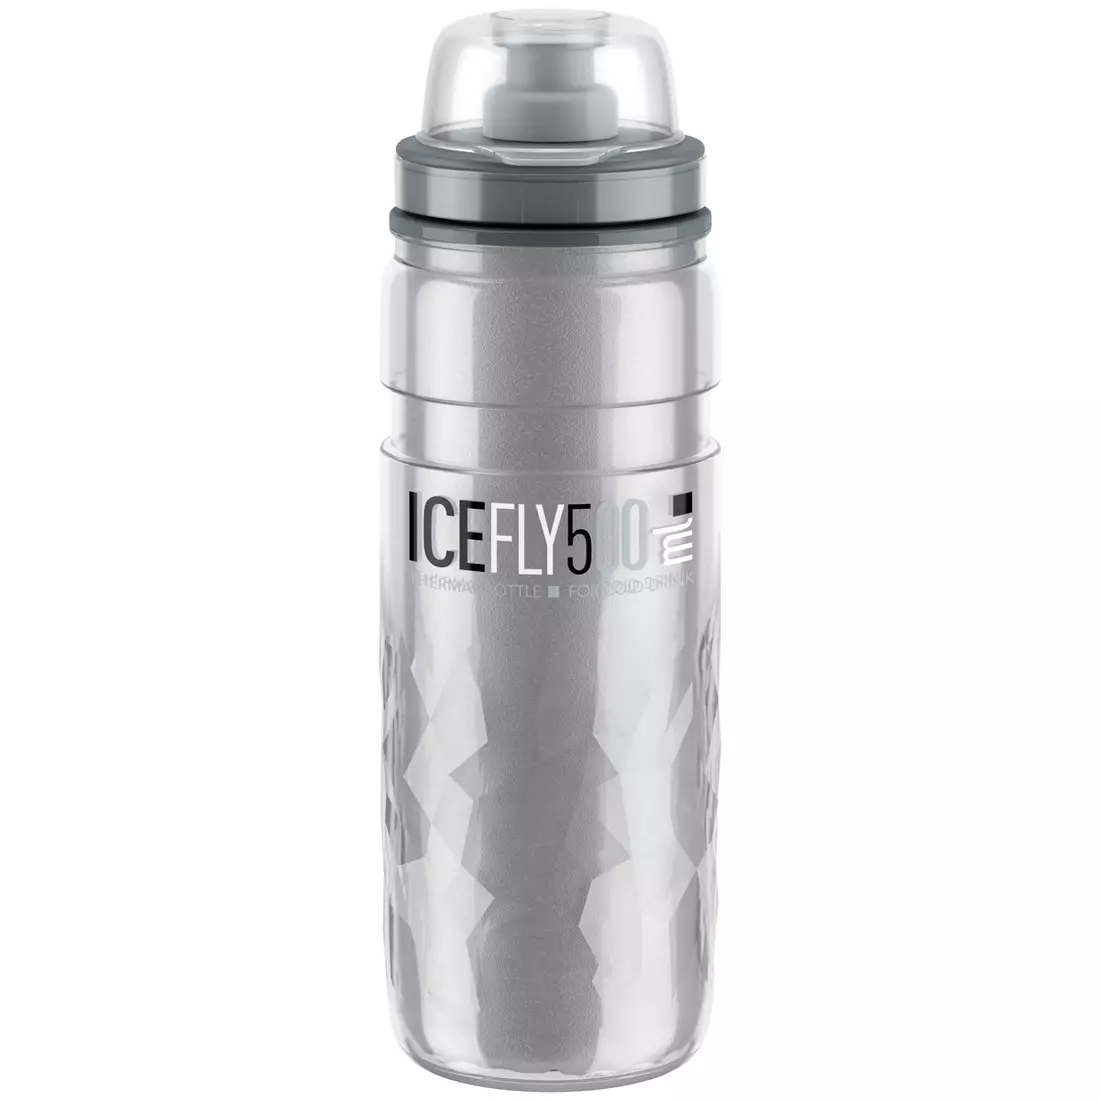 ELITE ICE FLY thermal bicycle bottle 500 ml, gray